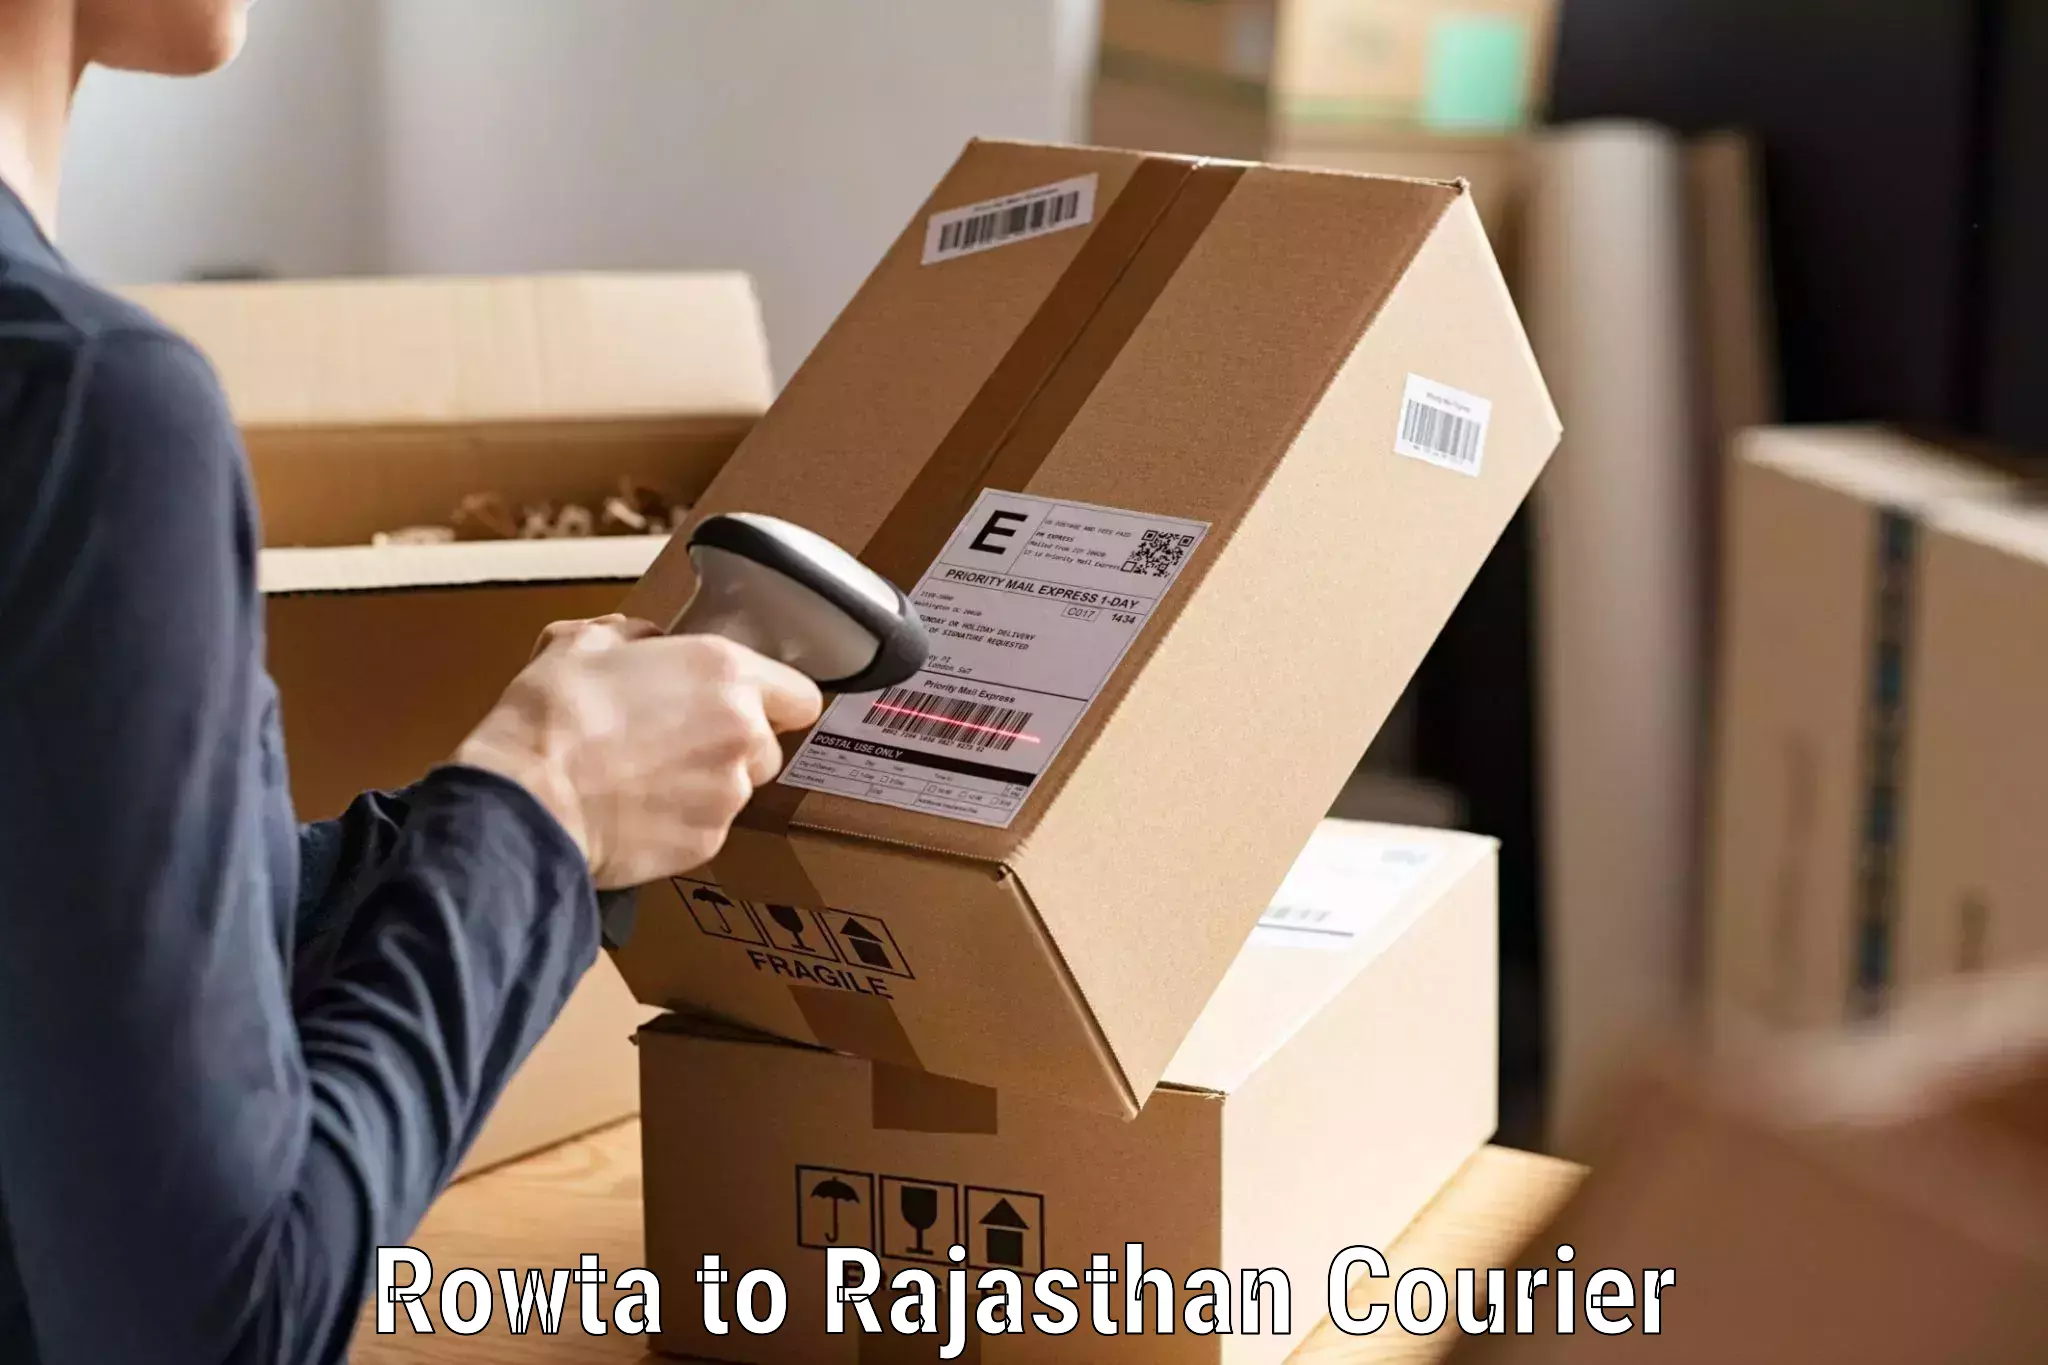 Courier service comparison Rowta to Udaipur